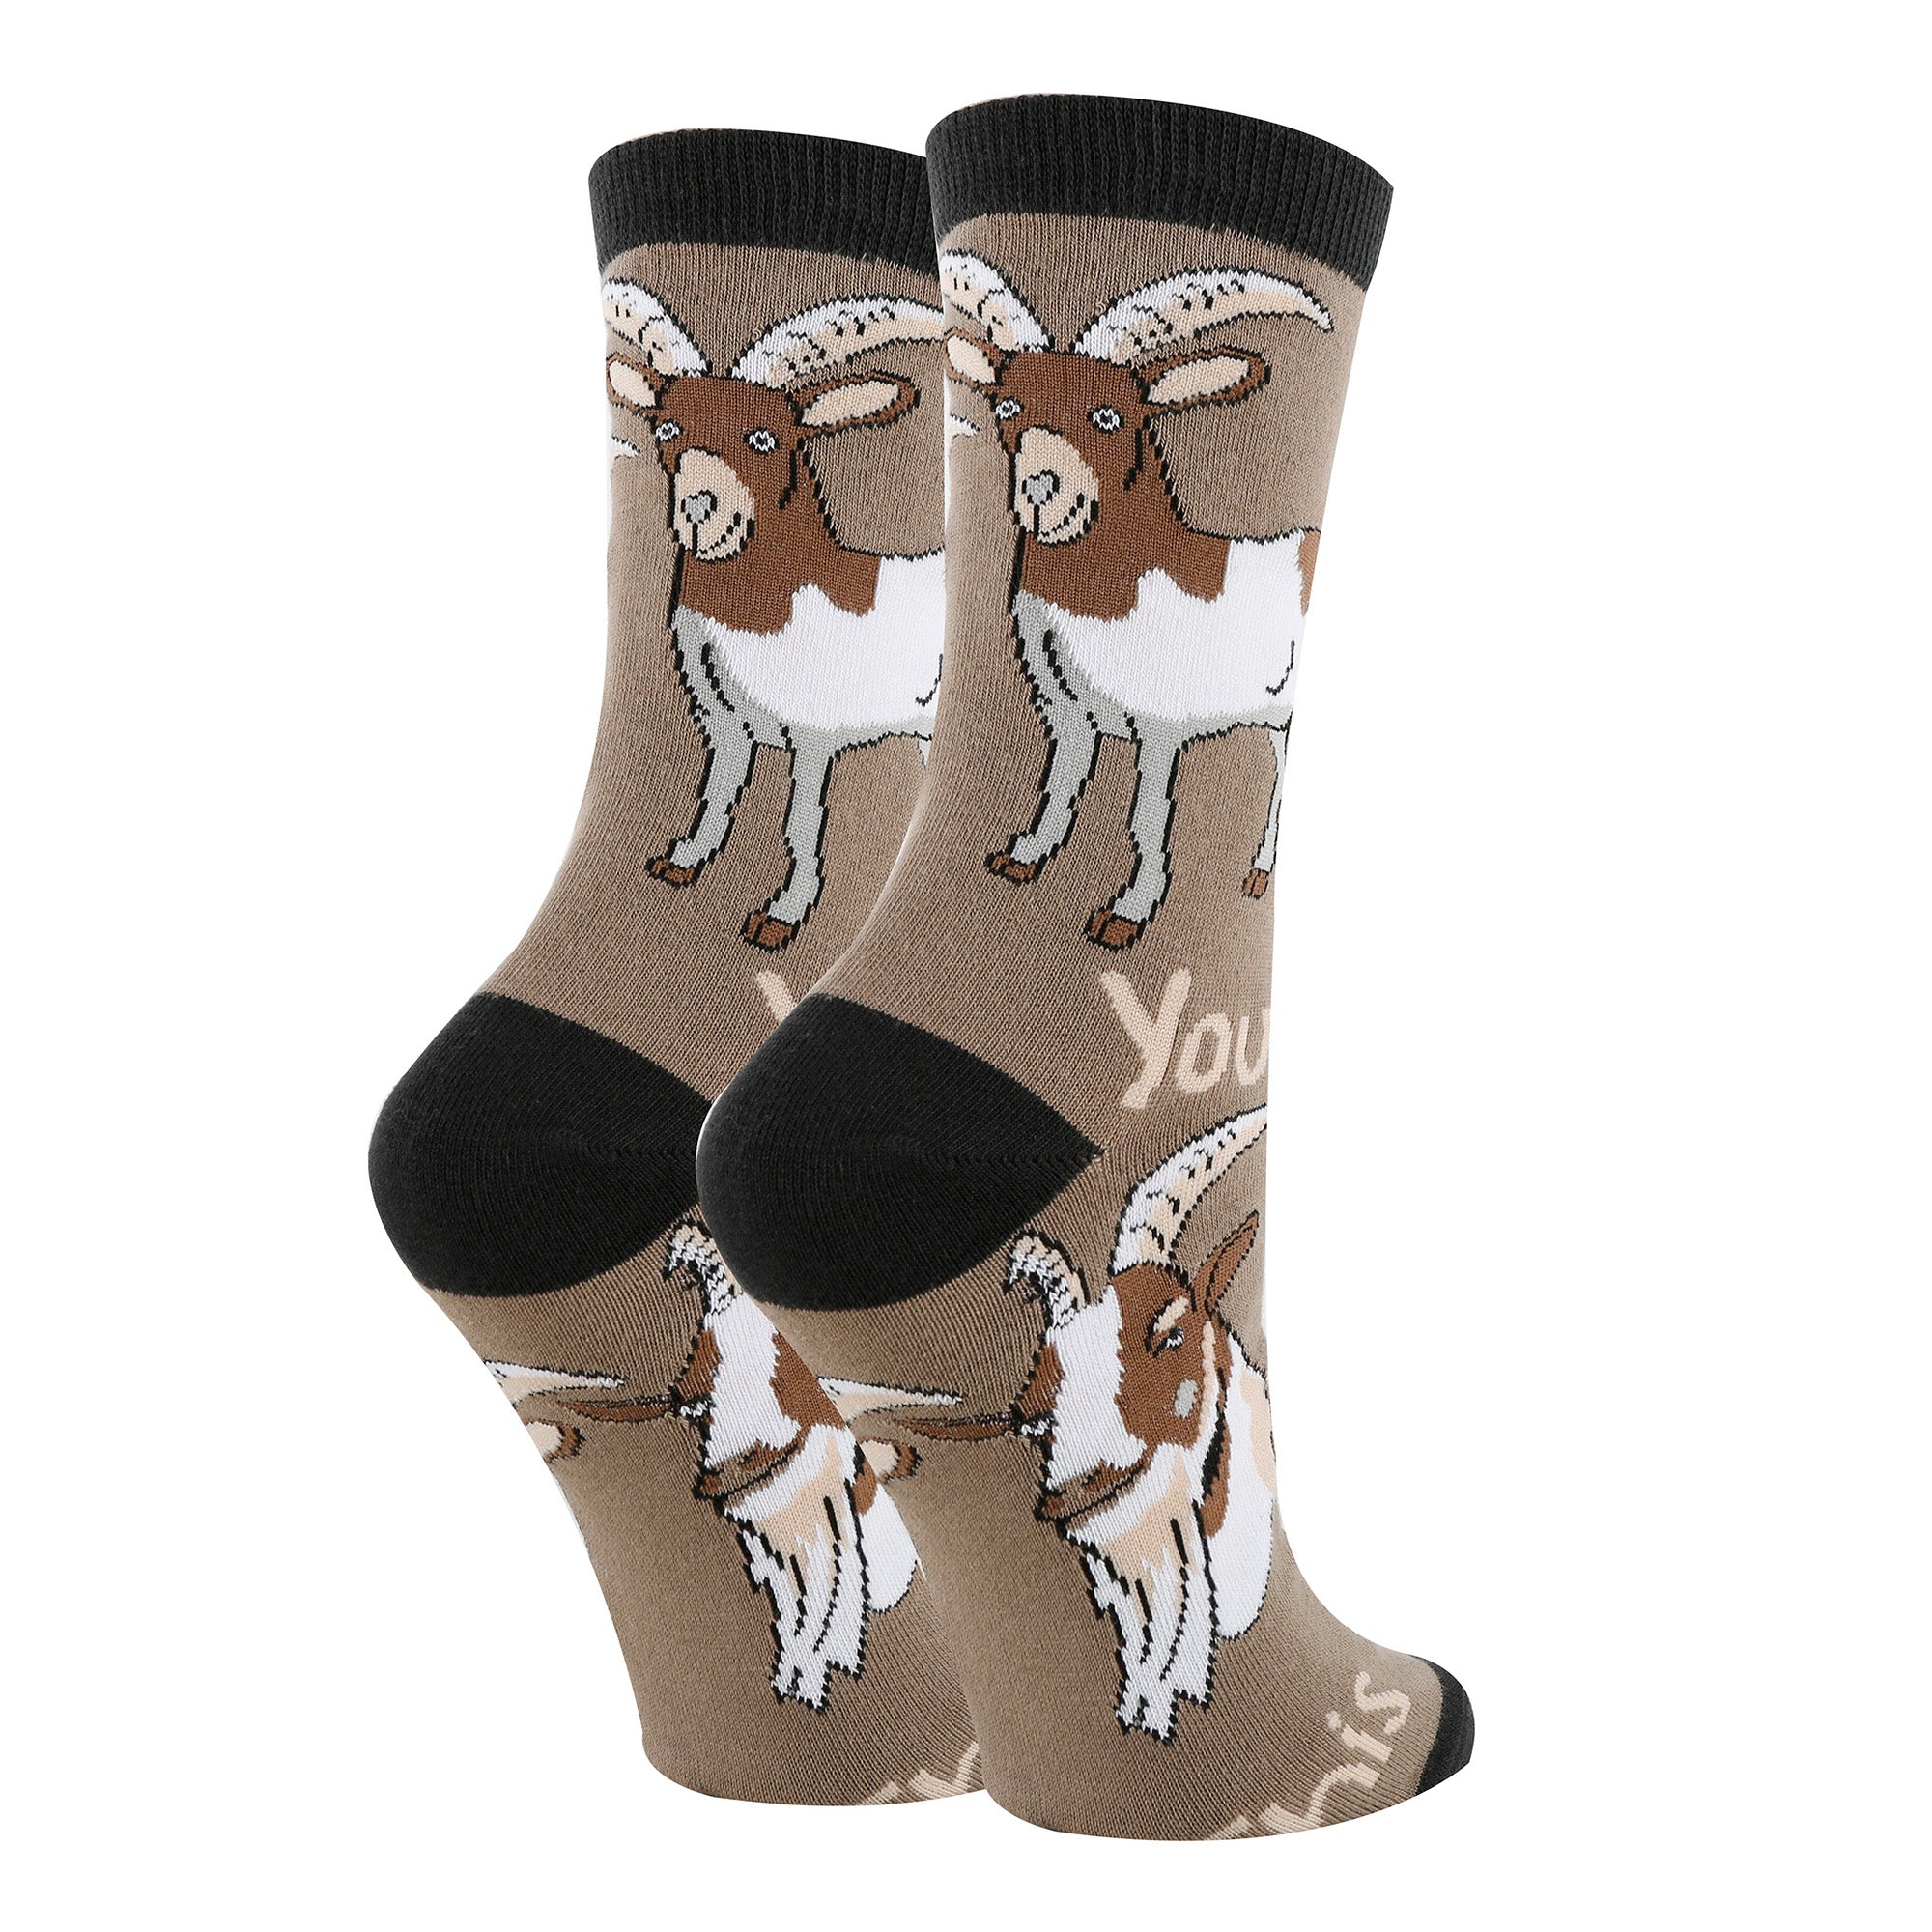 You Goat This Socks - 0